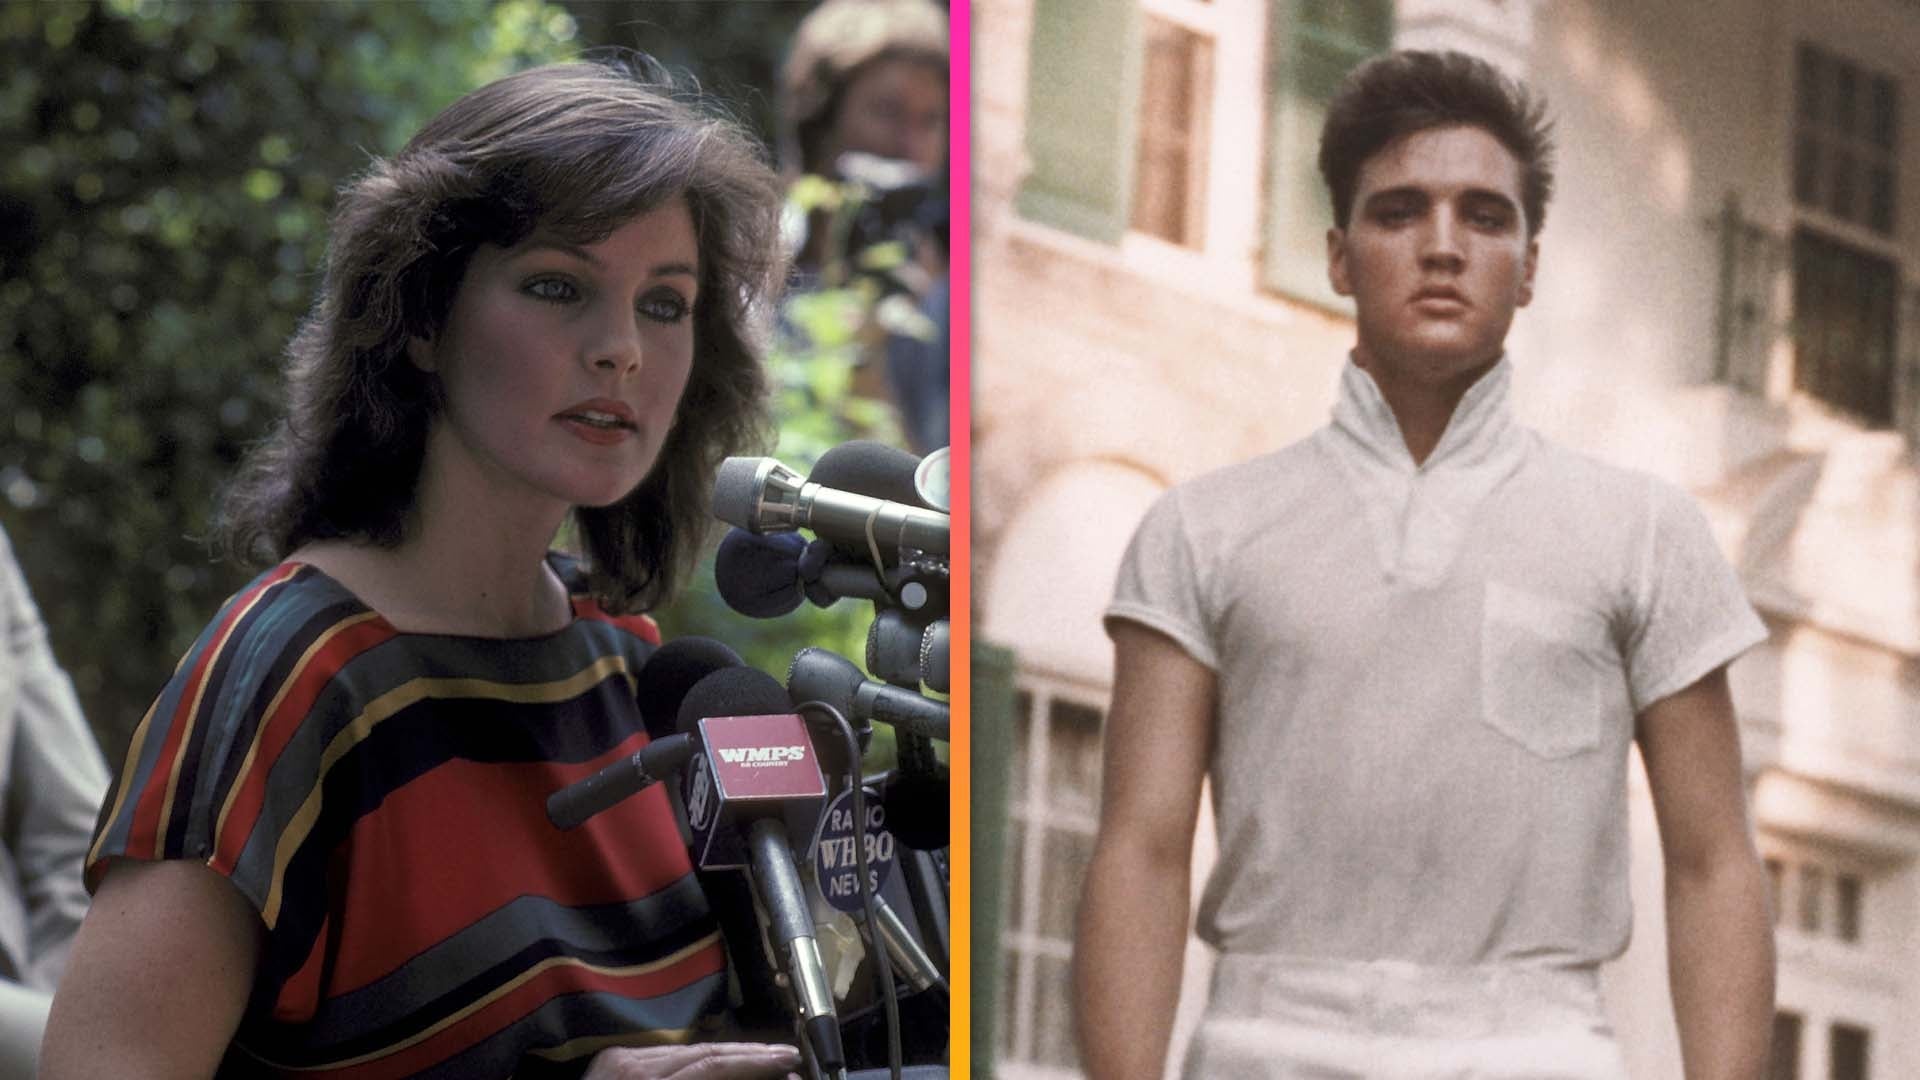 Priscilla Presley Explains Opening Graceland to the Public When Lisa Marie Was 14 (Flashback)